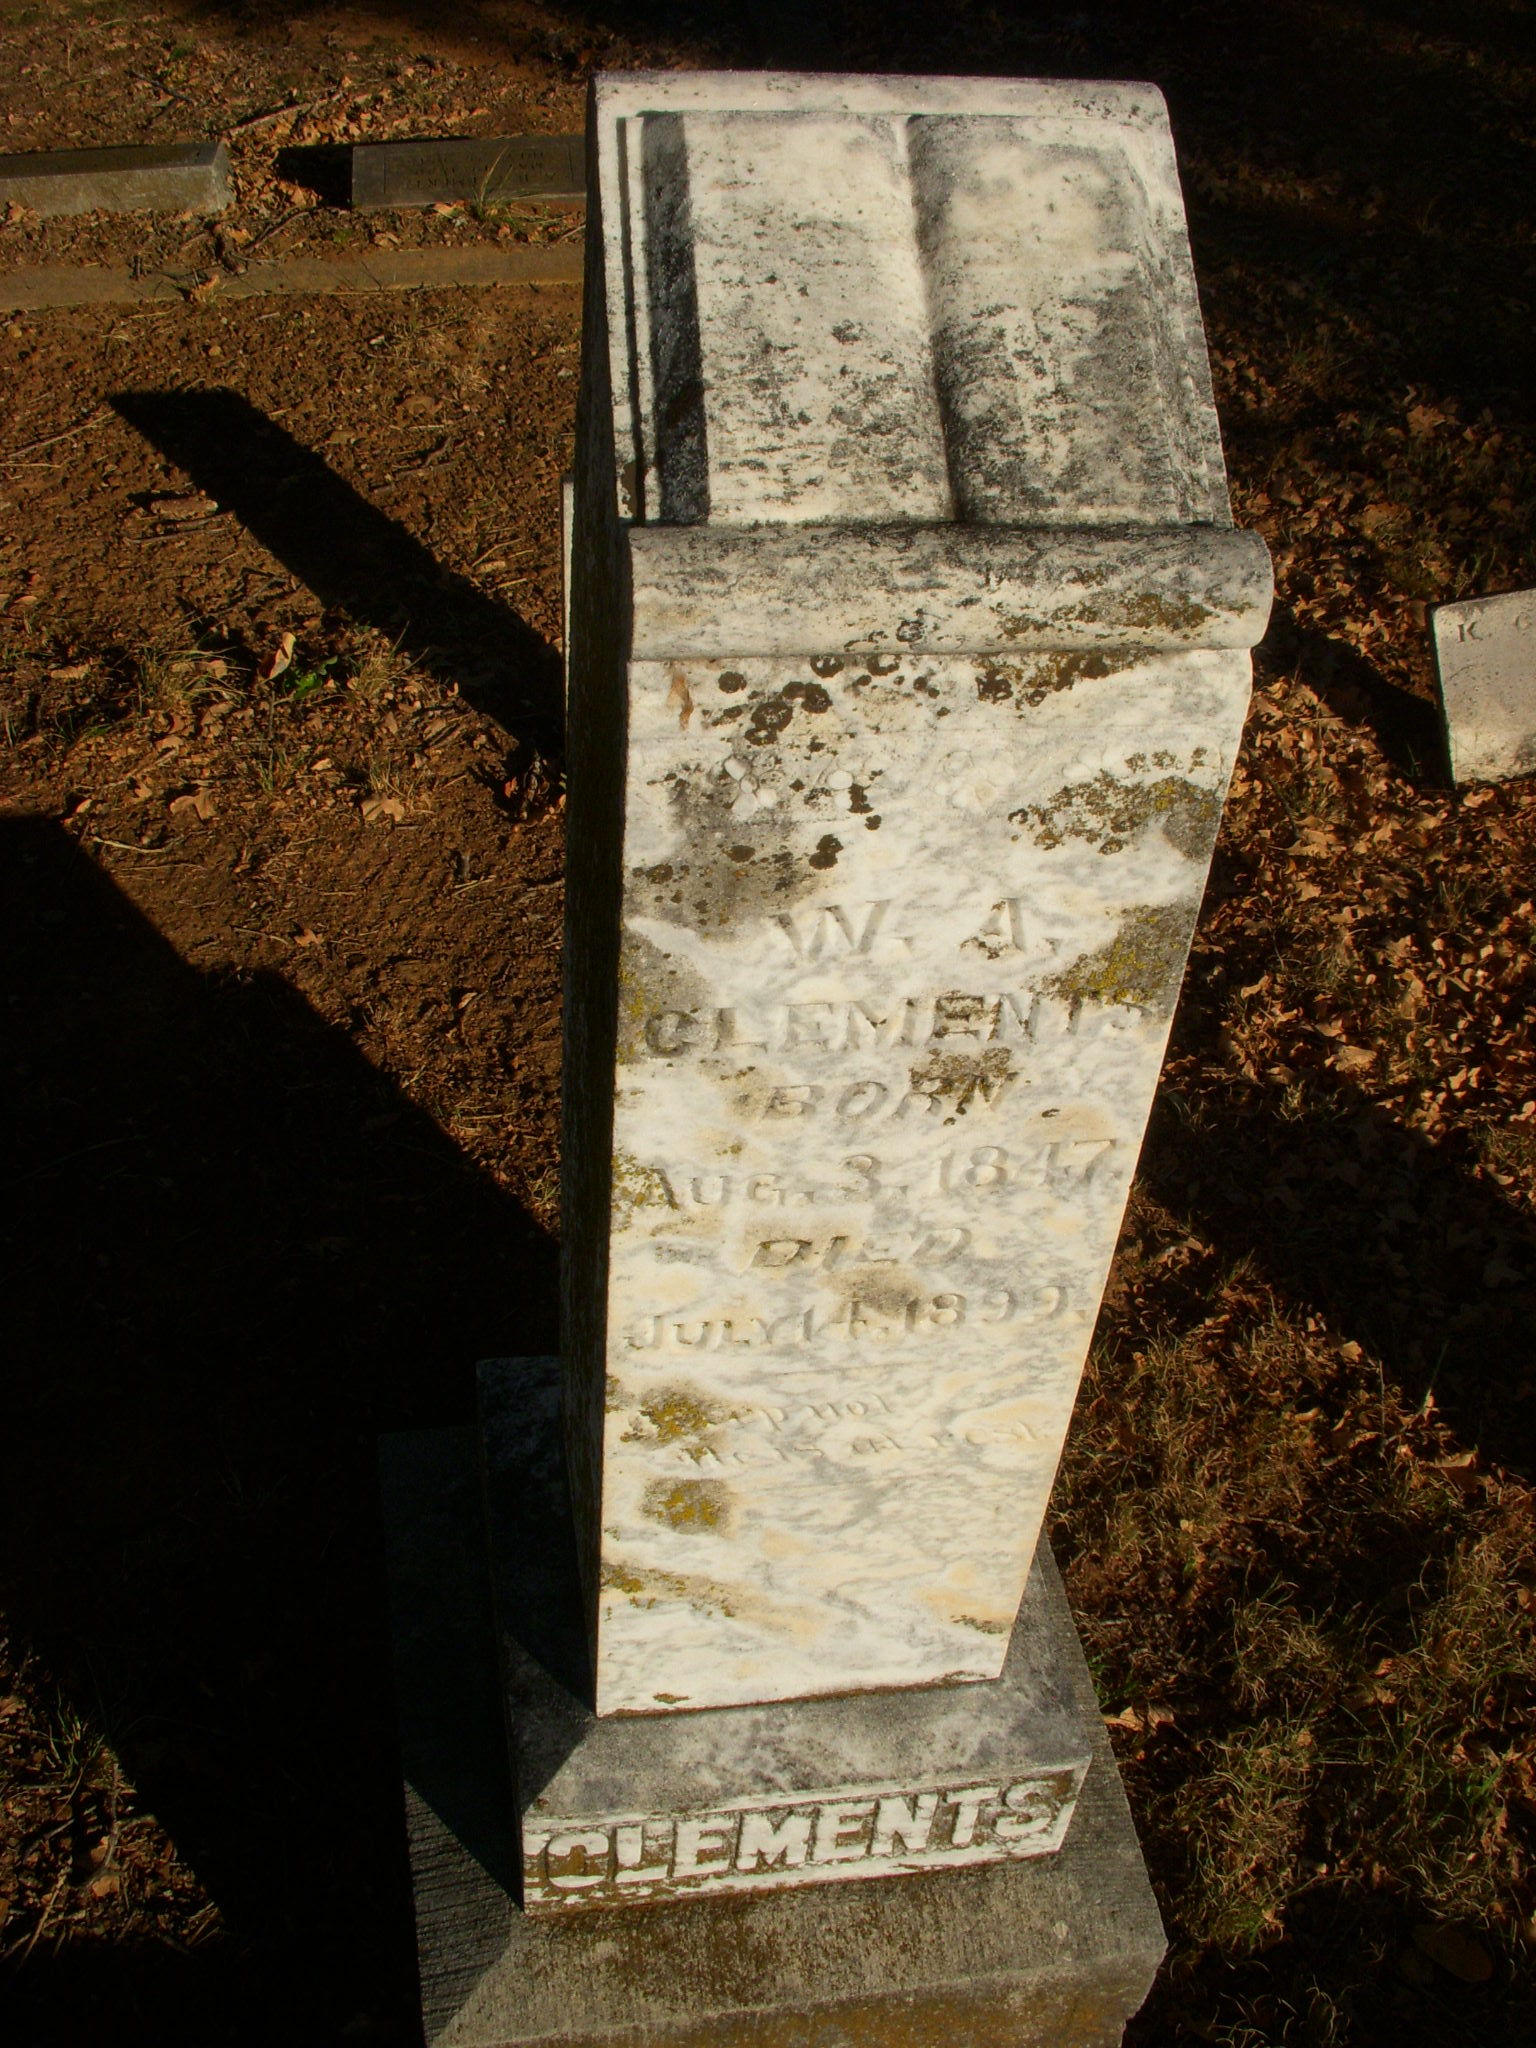 W.A. Clement tombstone